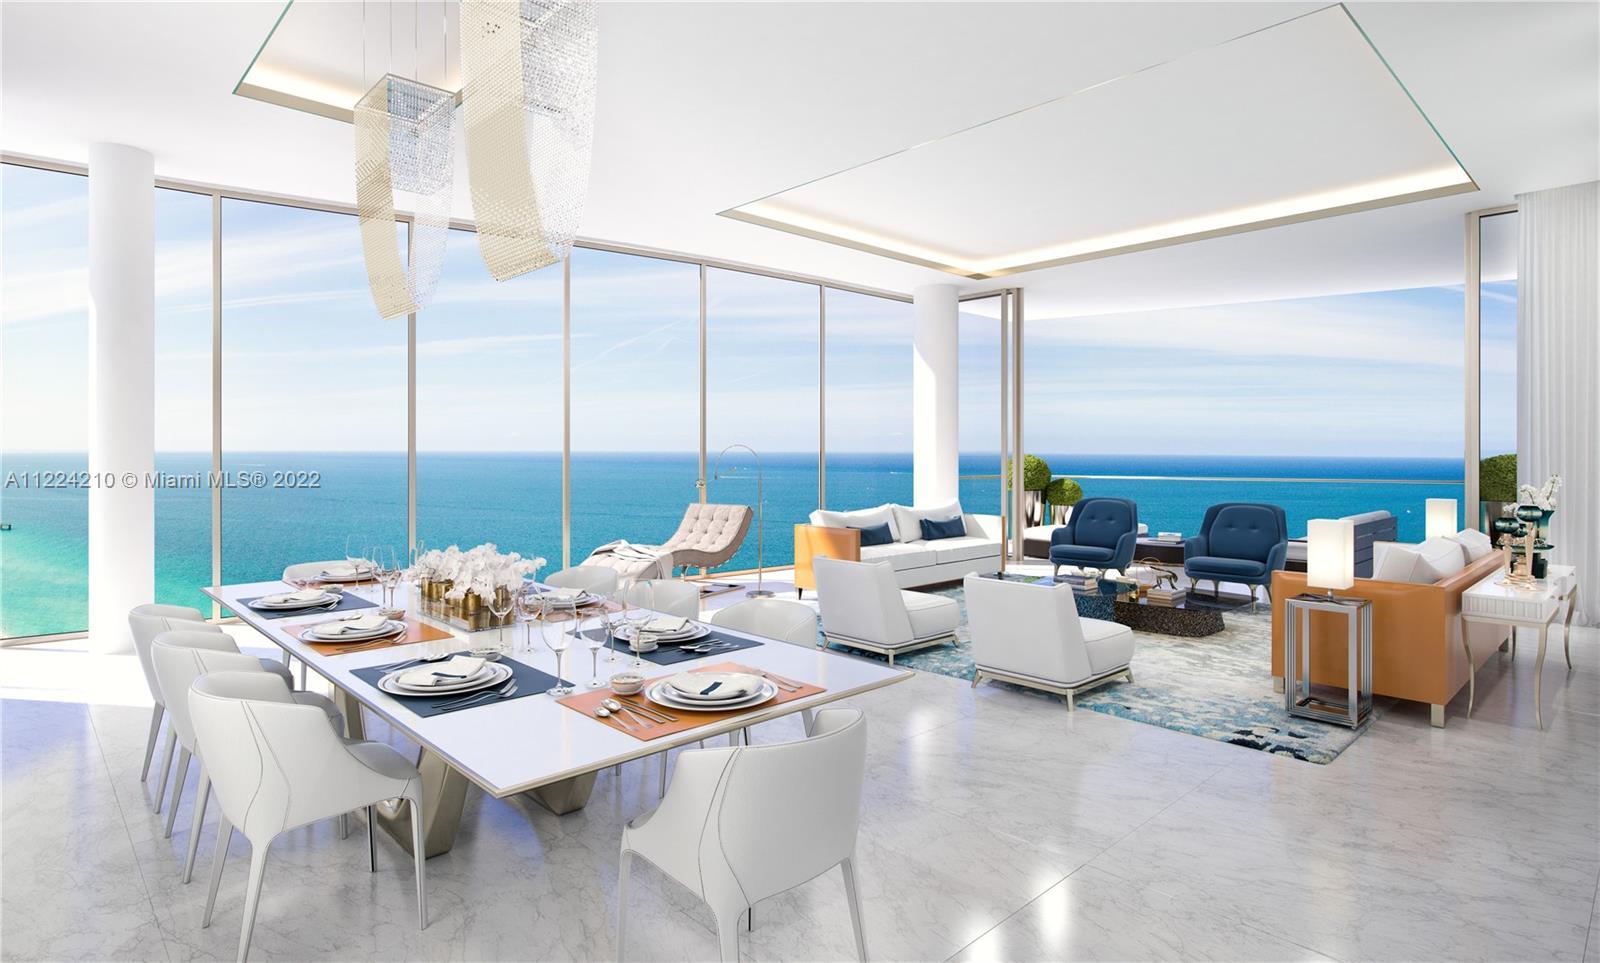 A spectacular, brand new corner residence in  the desirable Estates at Acqualina. This oceanfront fi